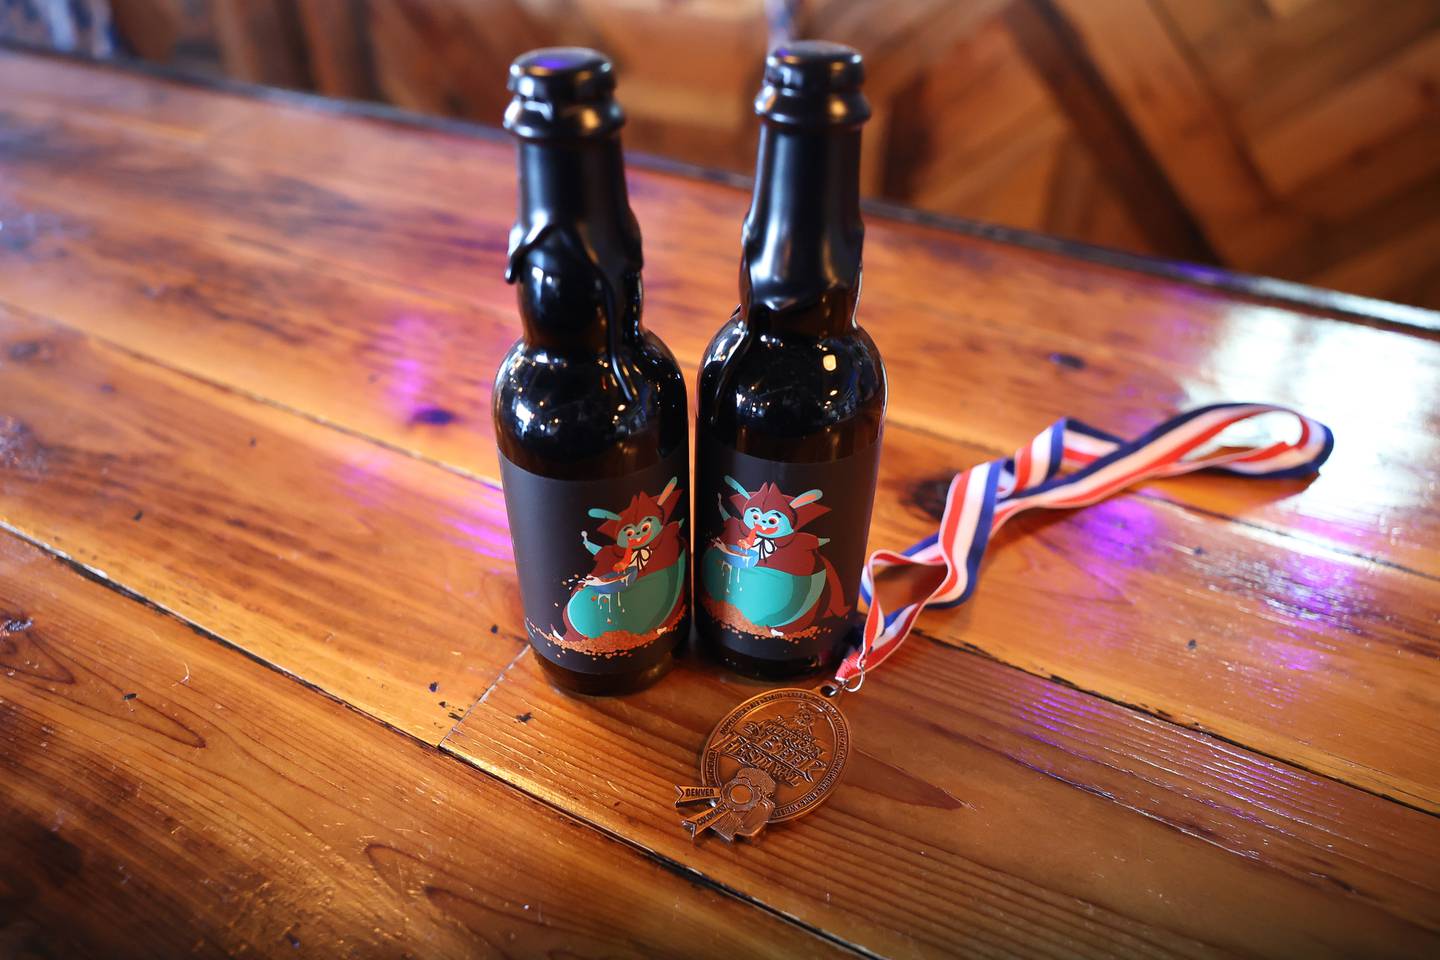 Werk Force Brewery recently won the bronze award at the Great American Beer Festival in Colorado for their Count Chungus craft beer, a 2-year bourbon barrel aged Imperial stout.